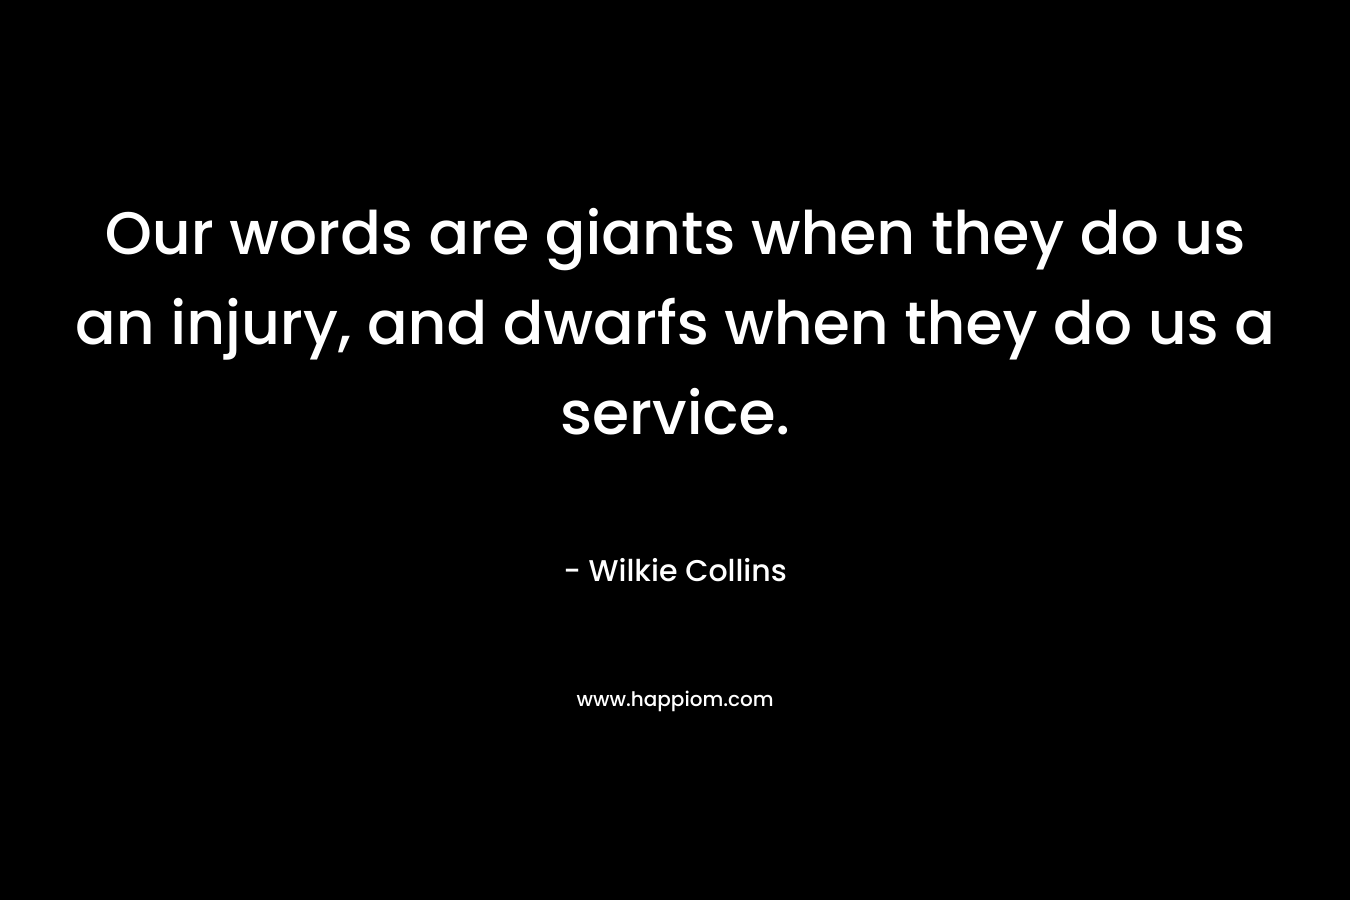 Our words are giants when they do us an injury, and dwarfs when they do us a service.